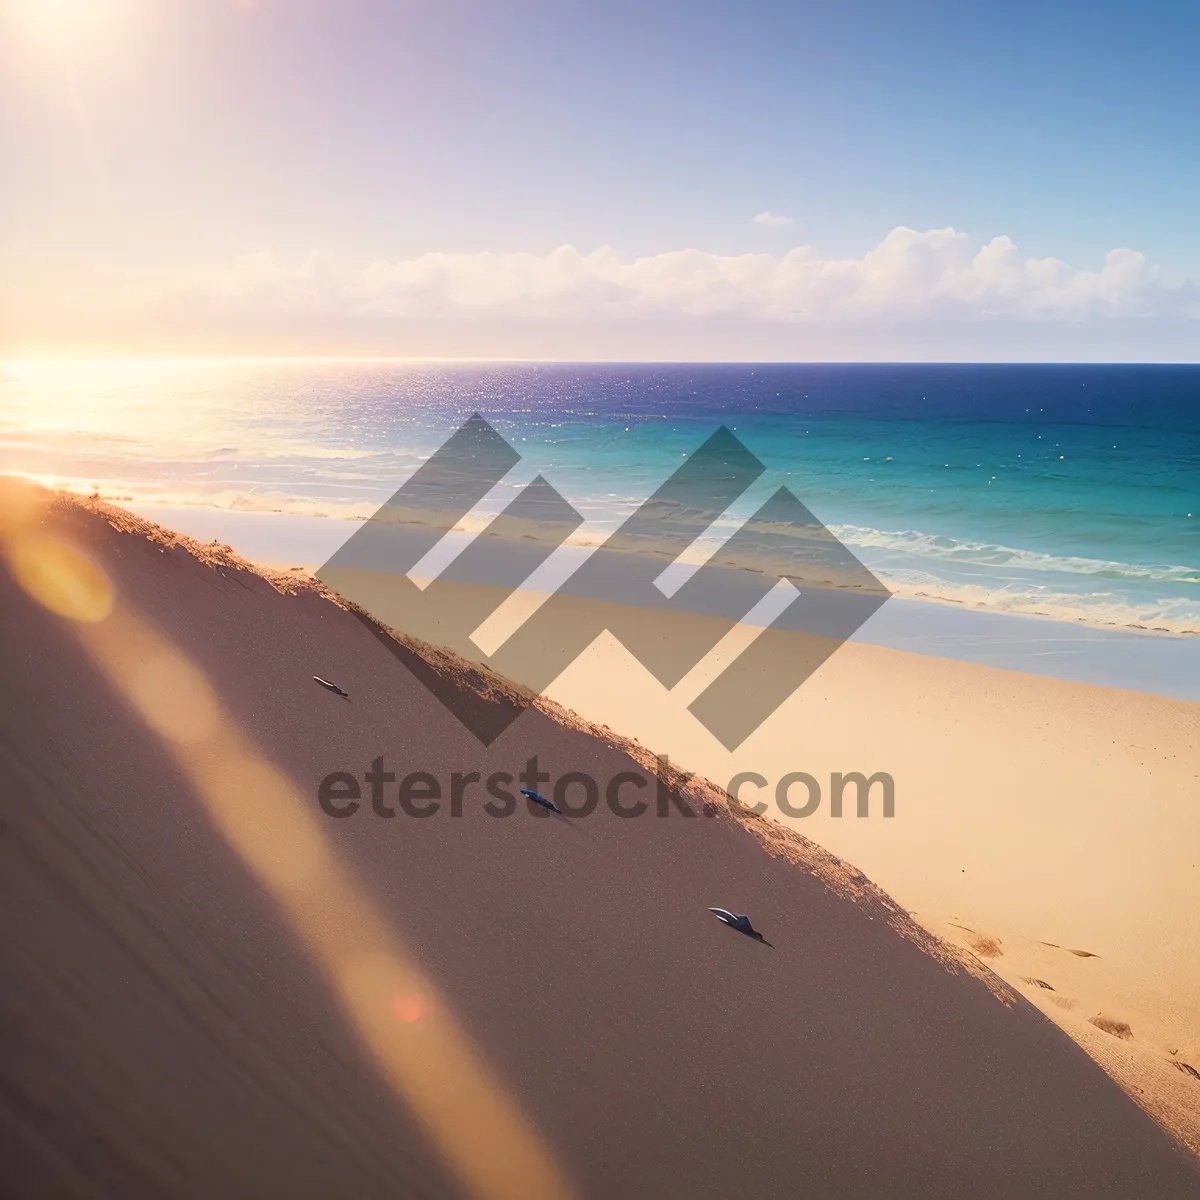 Picture of Idyllic Beachfront Escape: Crystal Clear Waters & Sandy Shoreline